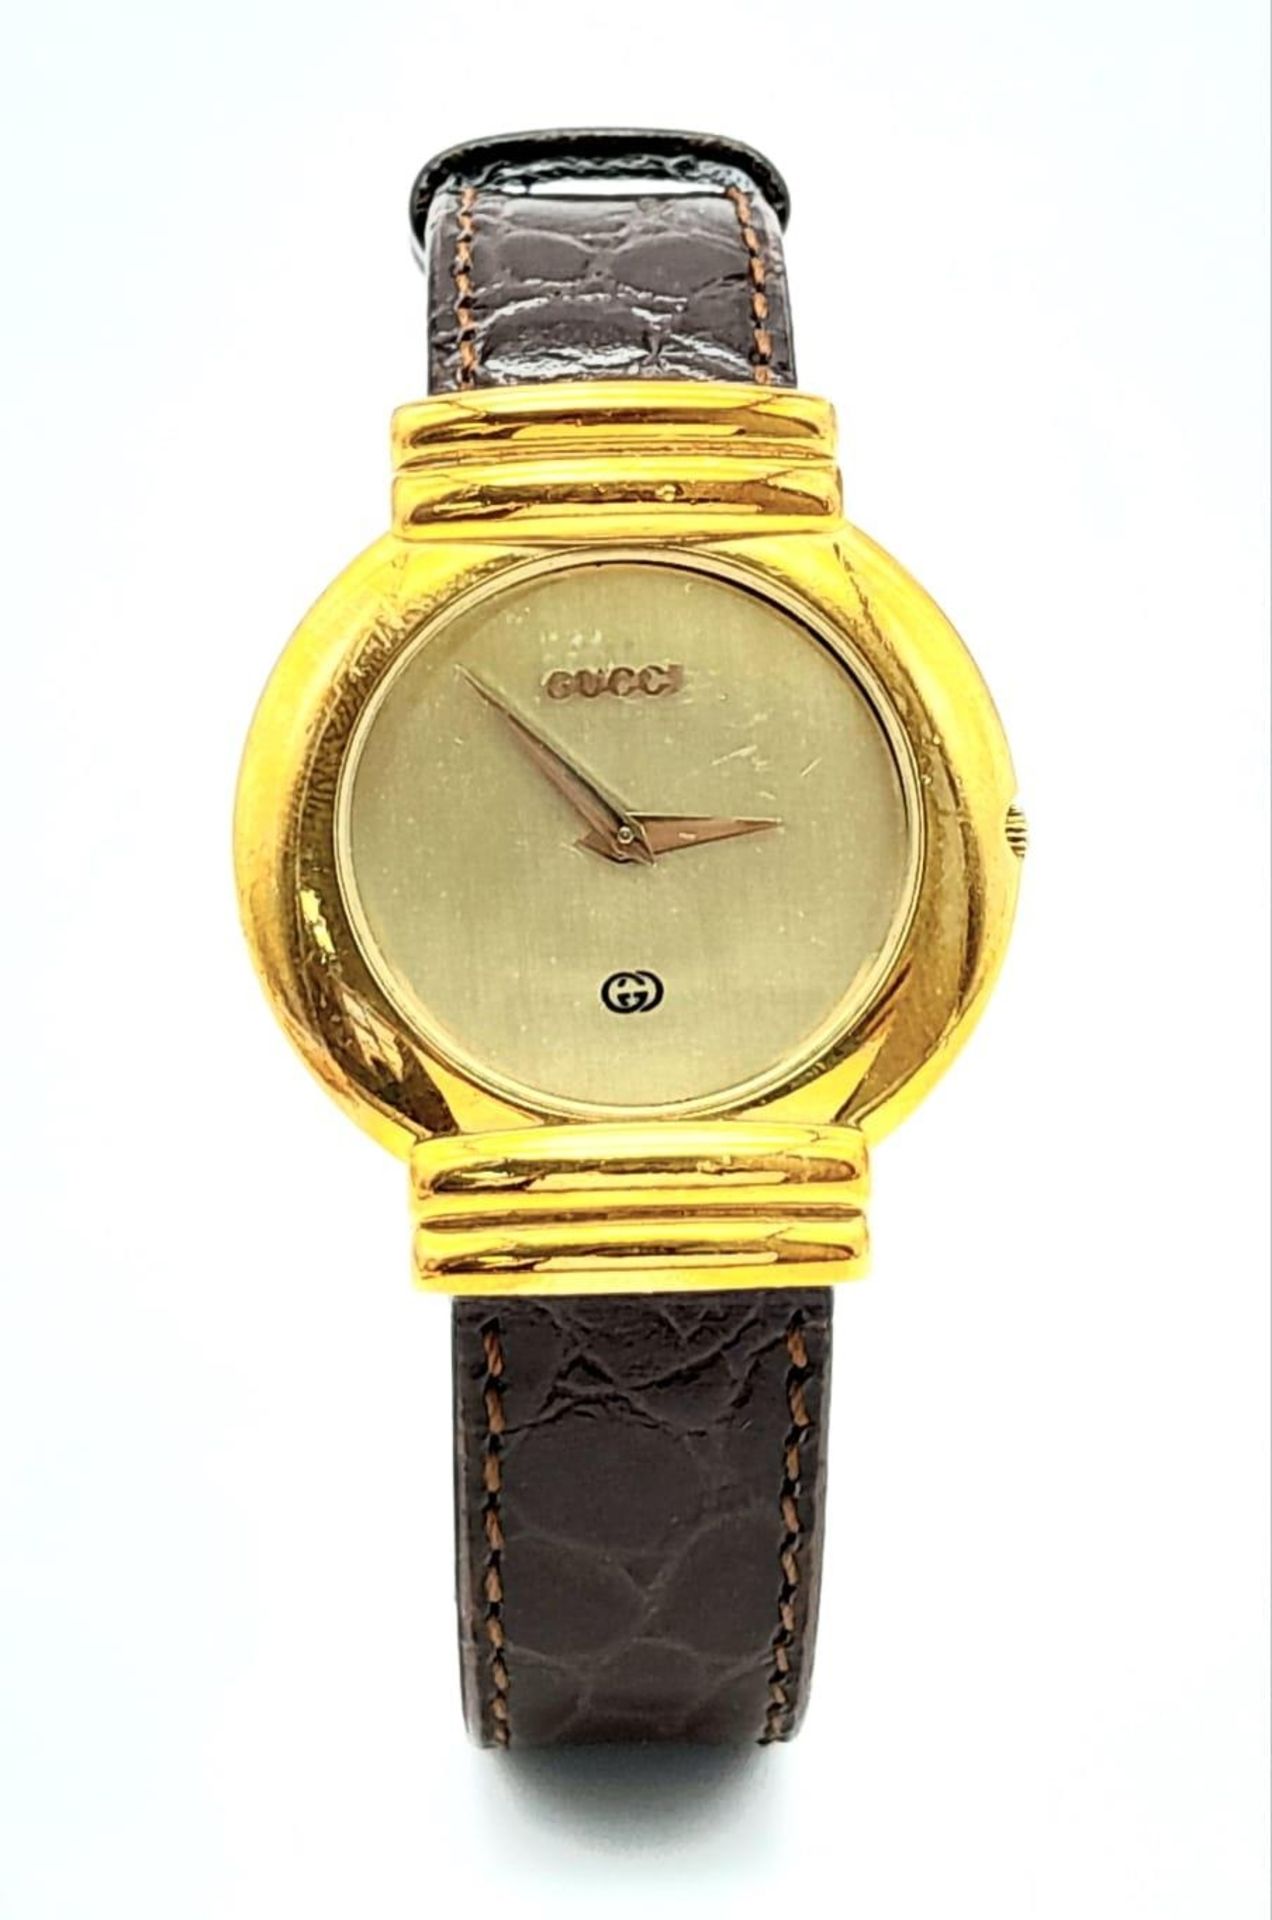 A gold plated GUCCI with crocodile skin strap, case: 33 mm, gold coloured dial and hands, Swiss made - Bild 2 aus 7